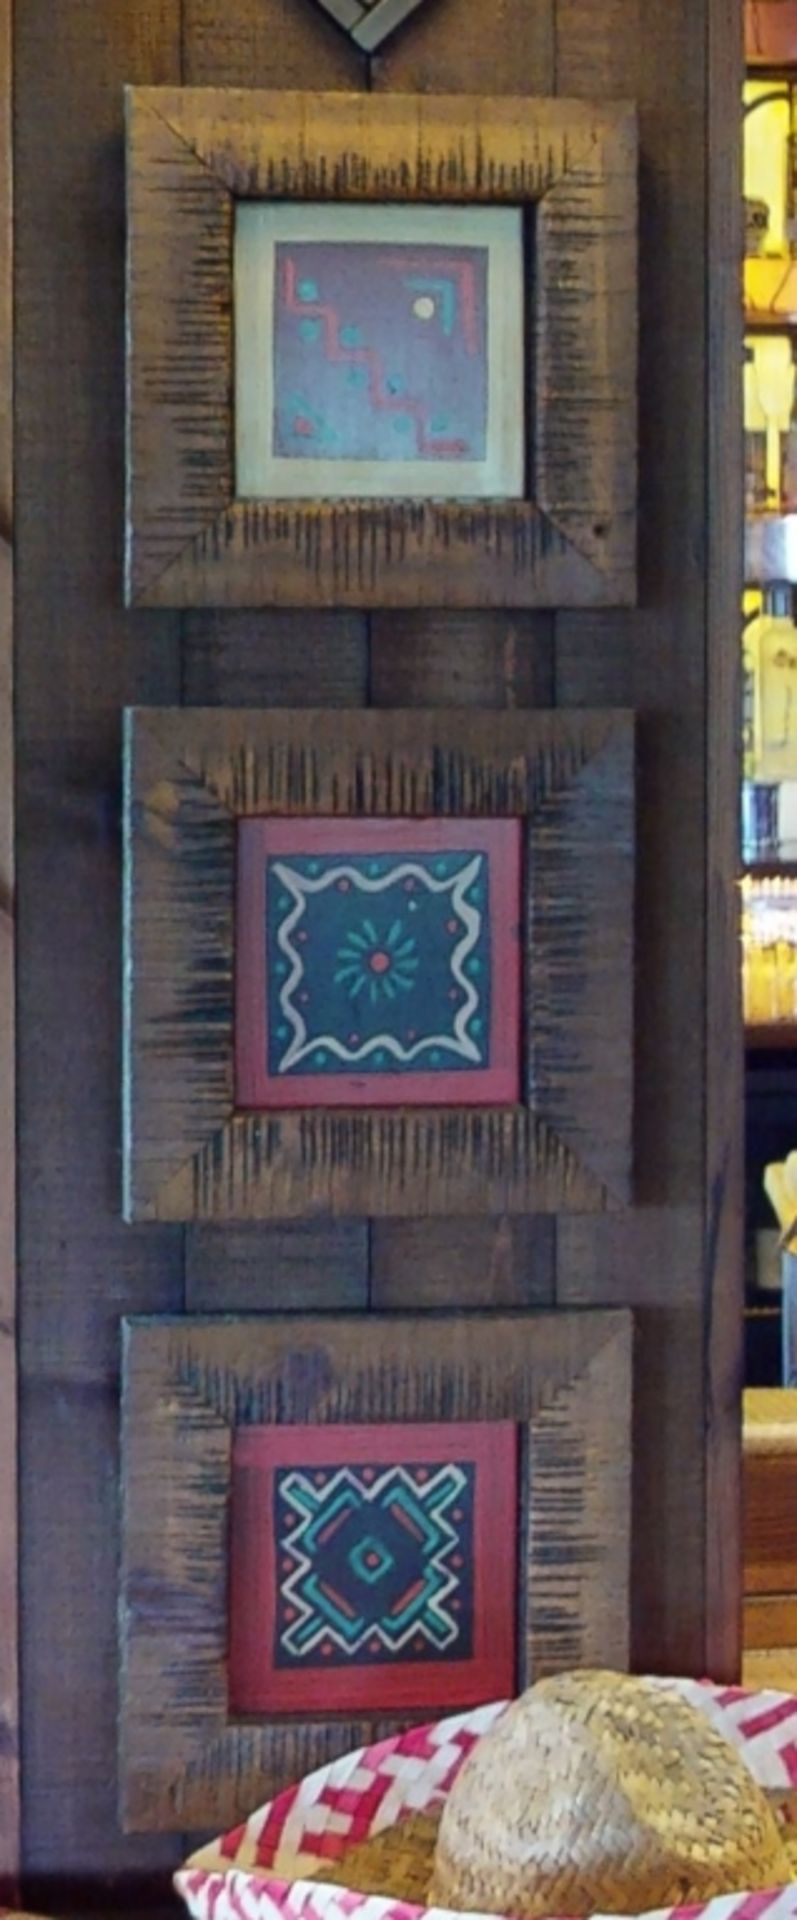 Approx 30 x Pieces of Wall Art From a Mexican Themed Restaurant - Image 13 of 26